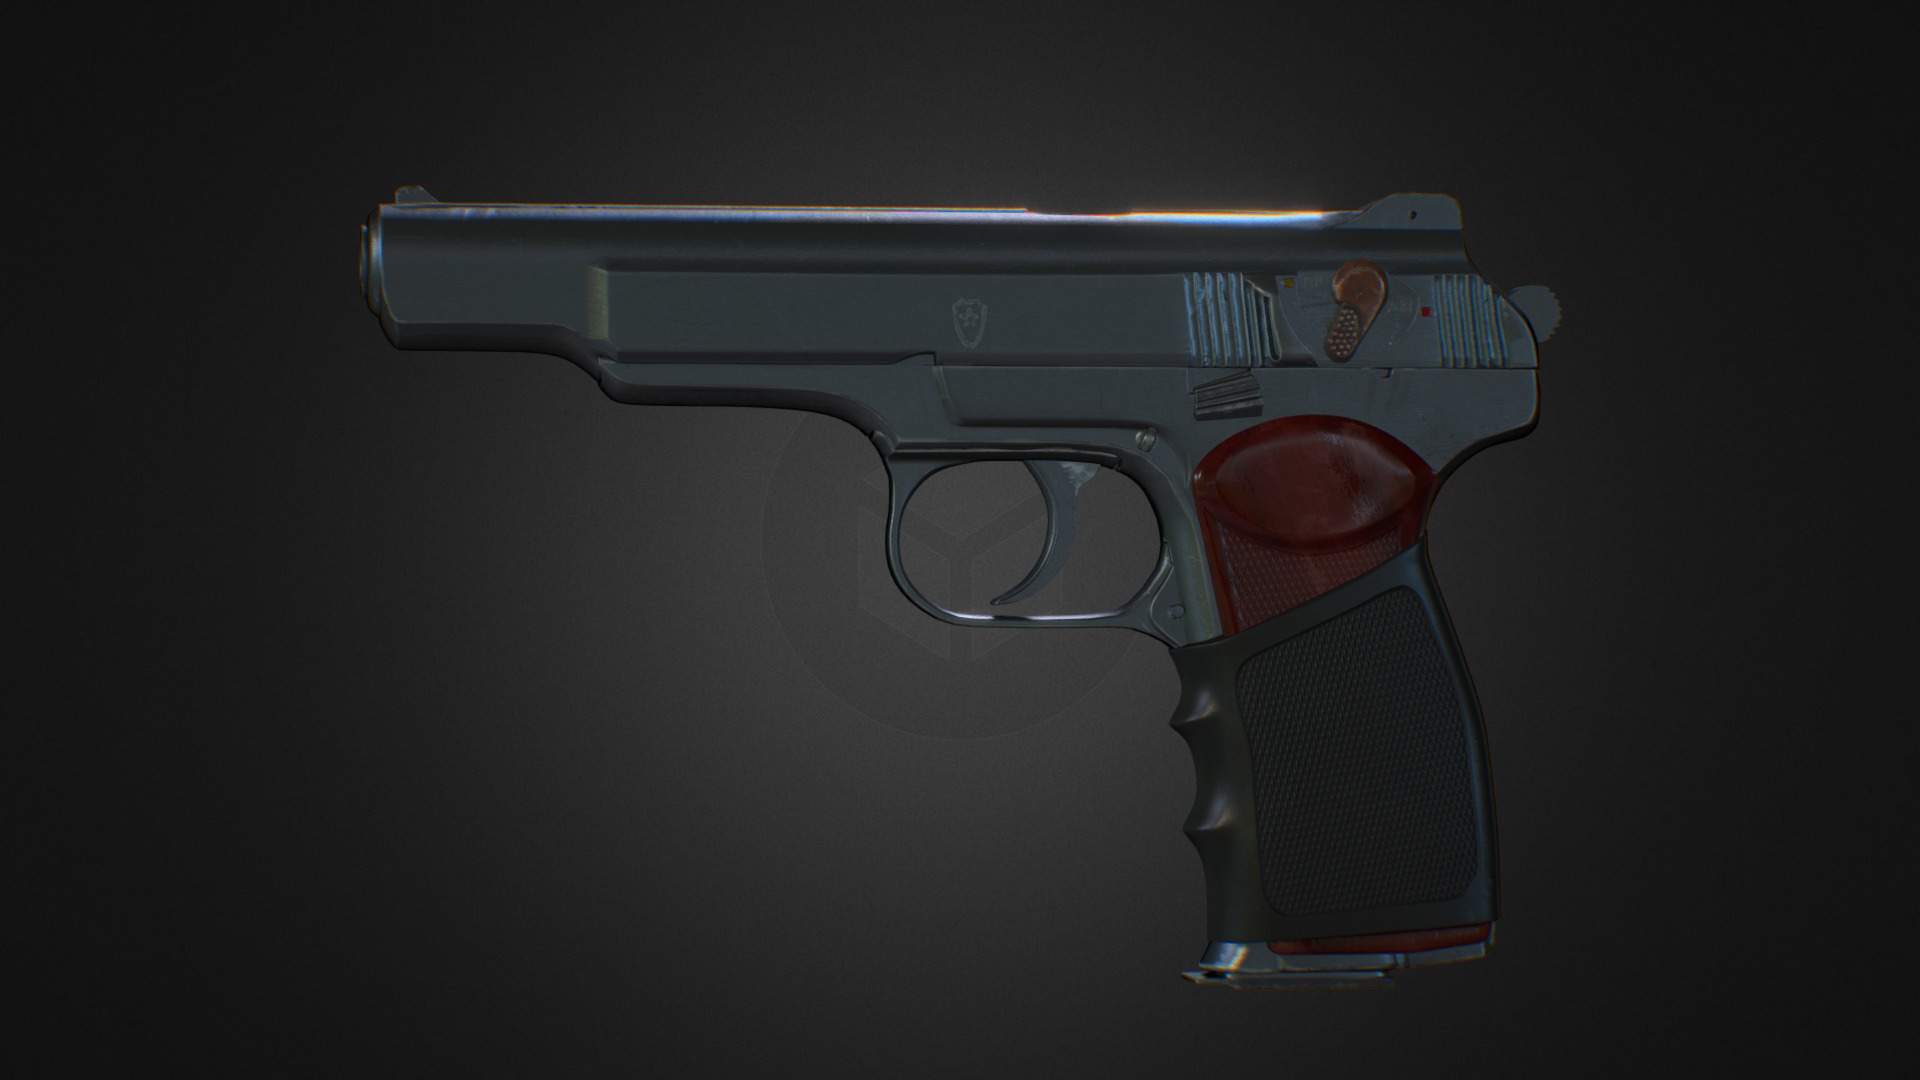 3D model Soviet 9mm automatic pistol - This is a 3D model of the Soviet 9mm automatic pistol. The 3D model is about a silver and black electric guitar.